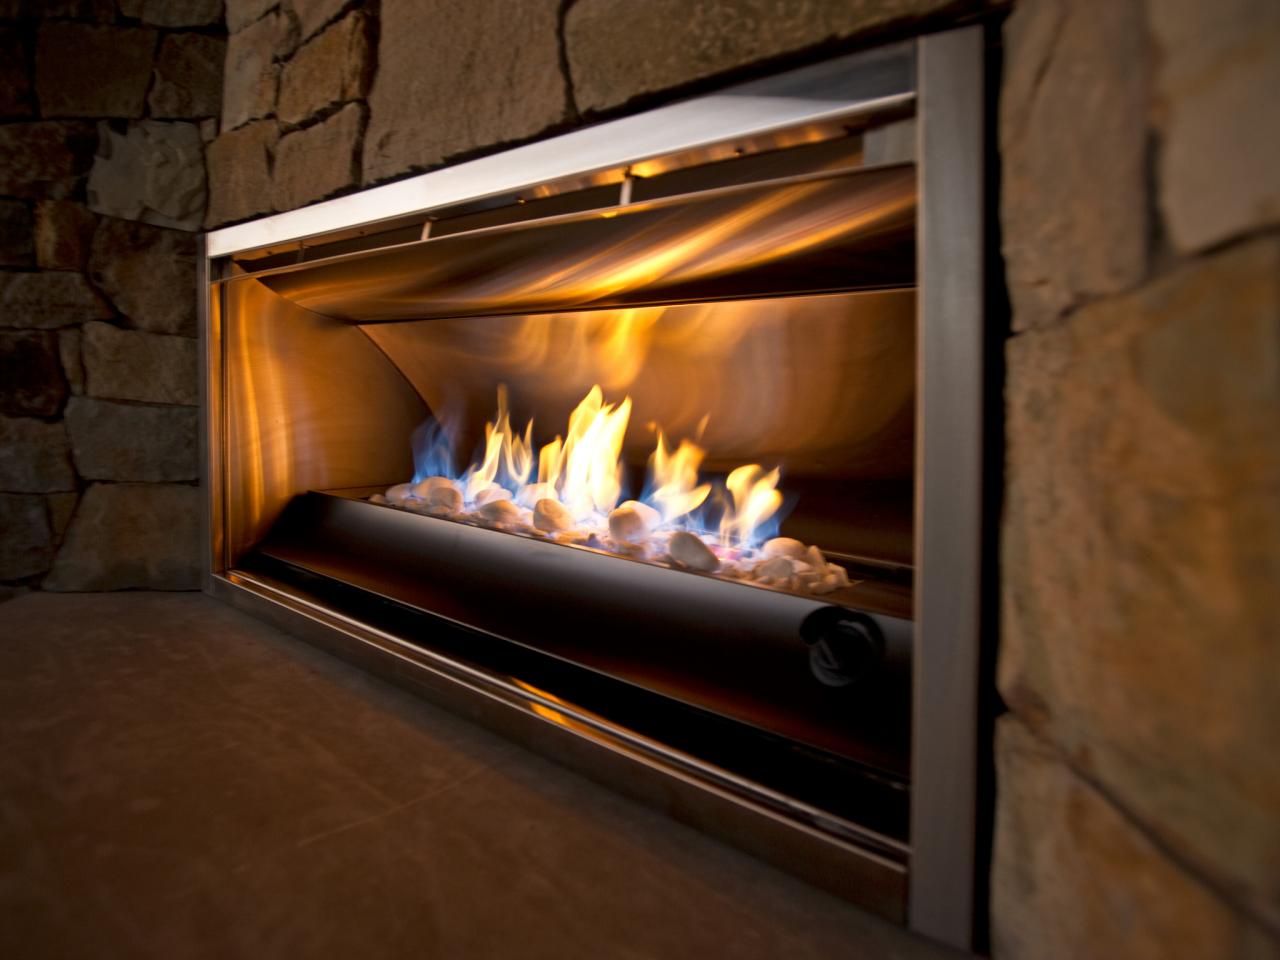 Outdoor Gas Fireplace Options and Ideas | HGTV